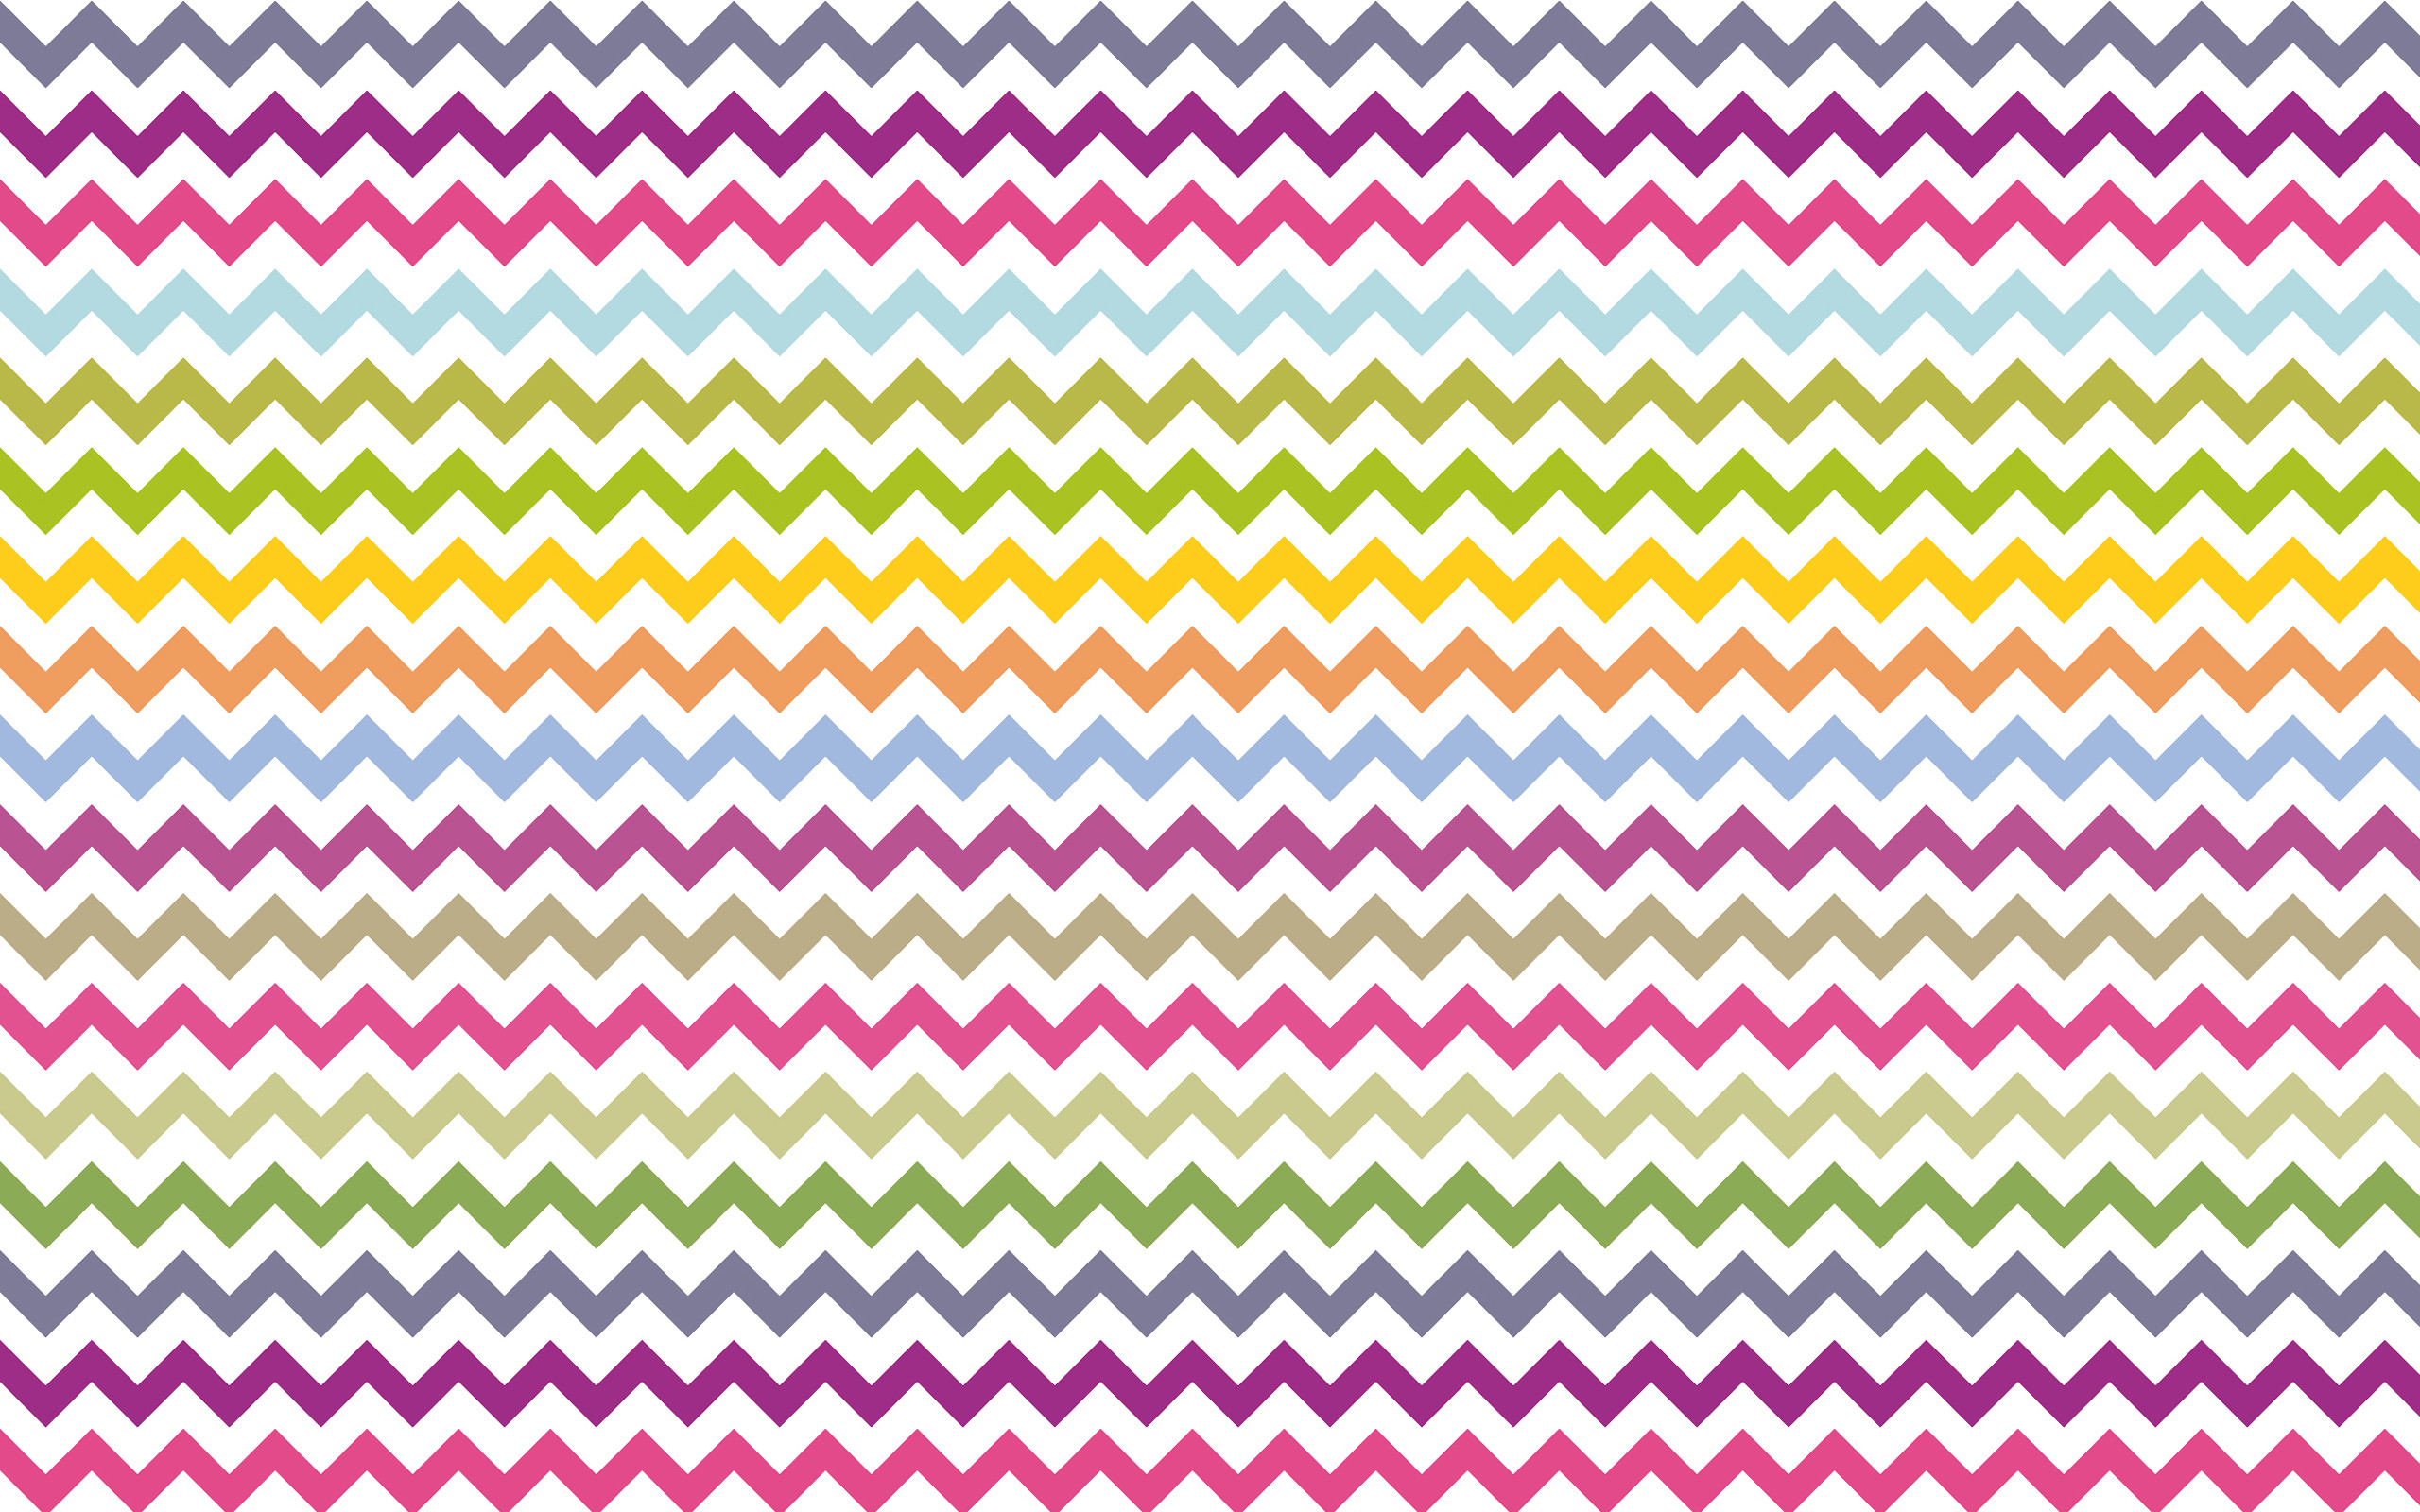 2560x1600 Let's see those chevrons! With this challenge we want to see all the .